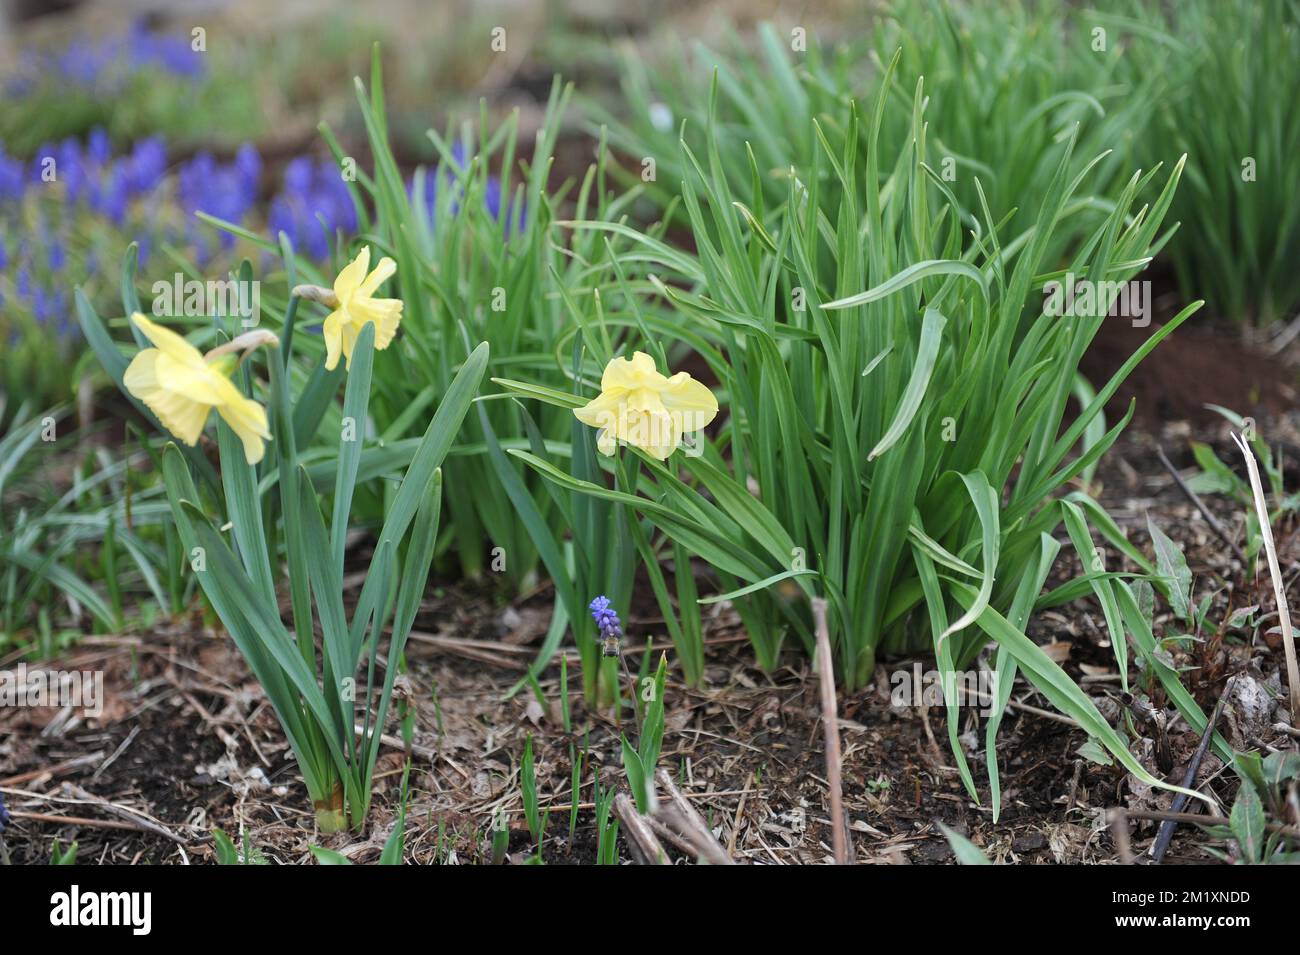 Pale yellow with white cups Large-Cupped daffodils (Narcissus) Avalon bloom in a garden in April Stock Photo